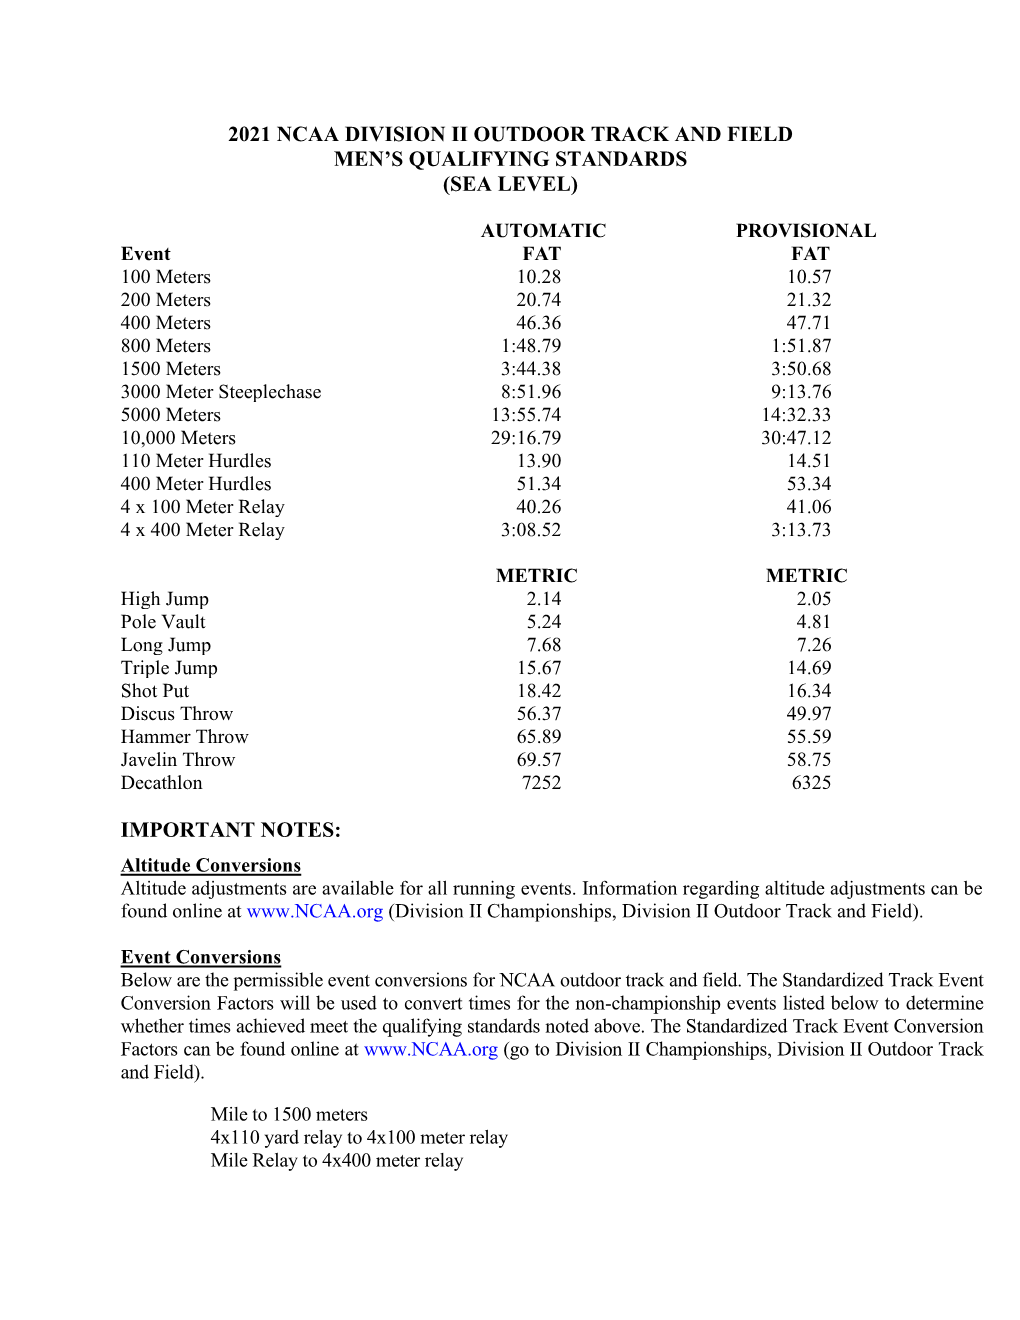 2021 Ncaa Division Ii Outdoor Track and Field Men's Qualifying Standards